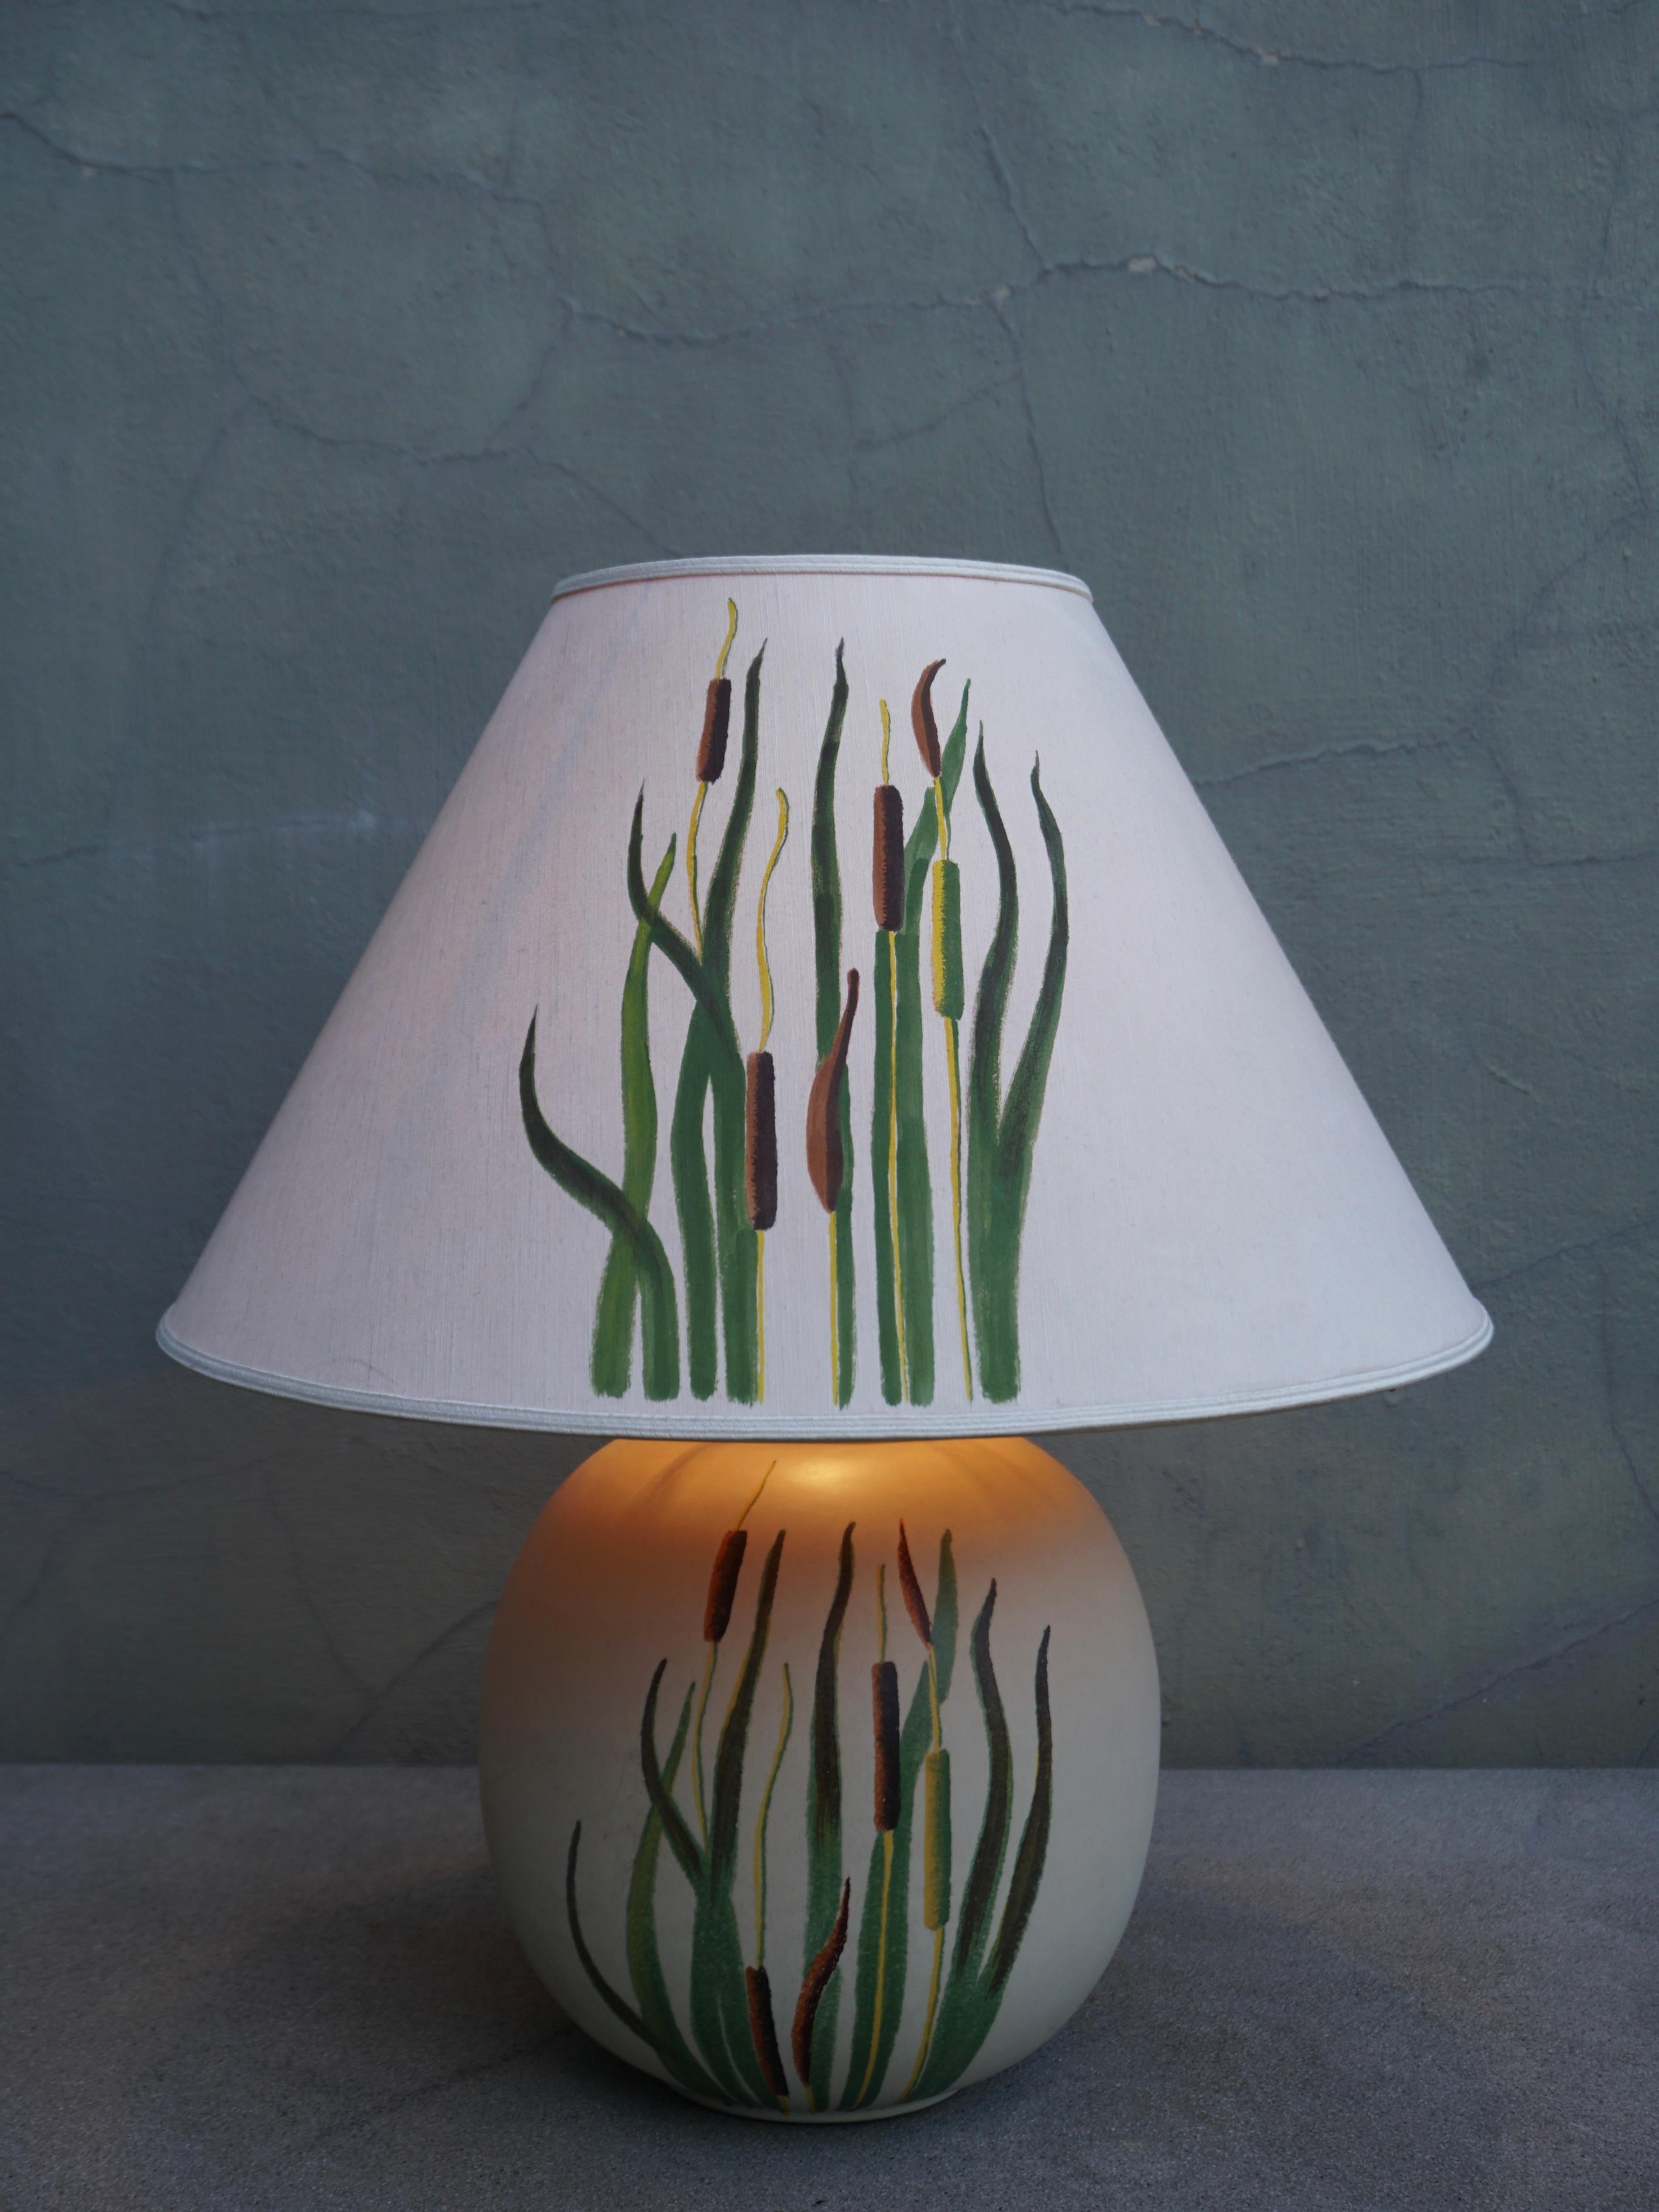 French Ceramic Table Lamp with Botanical Representation of Cattails Grass For Sale